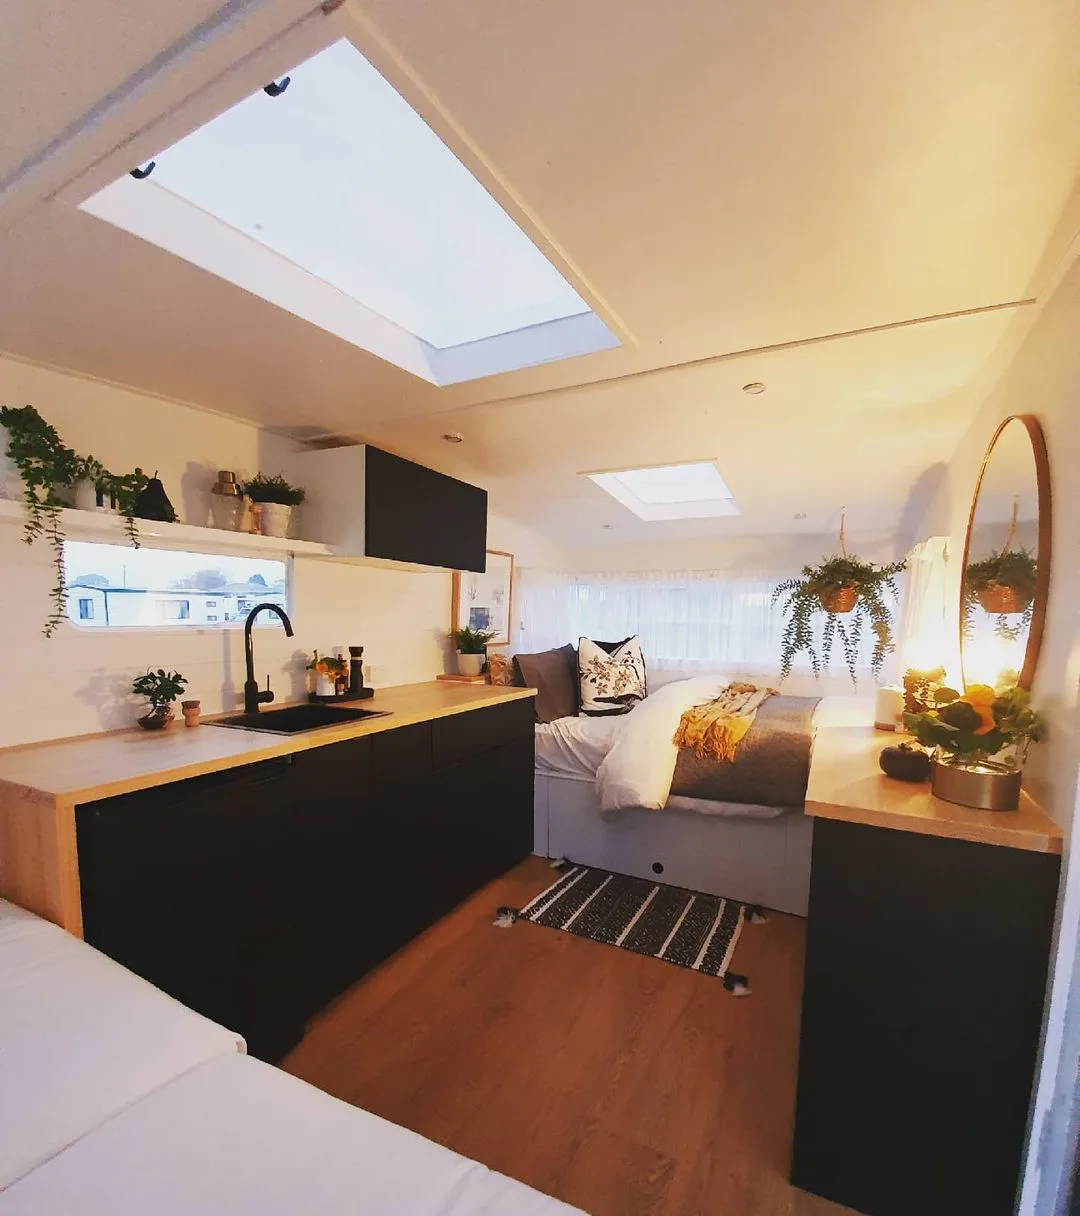 Interior view of a remodeled travel trailer showing the bed and kitchen area.